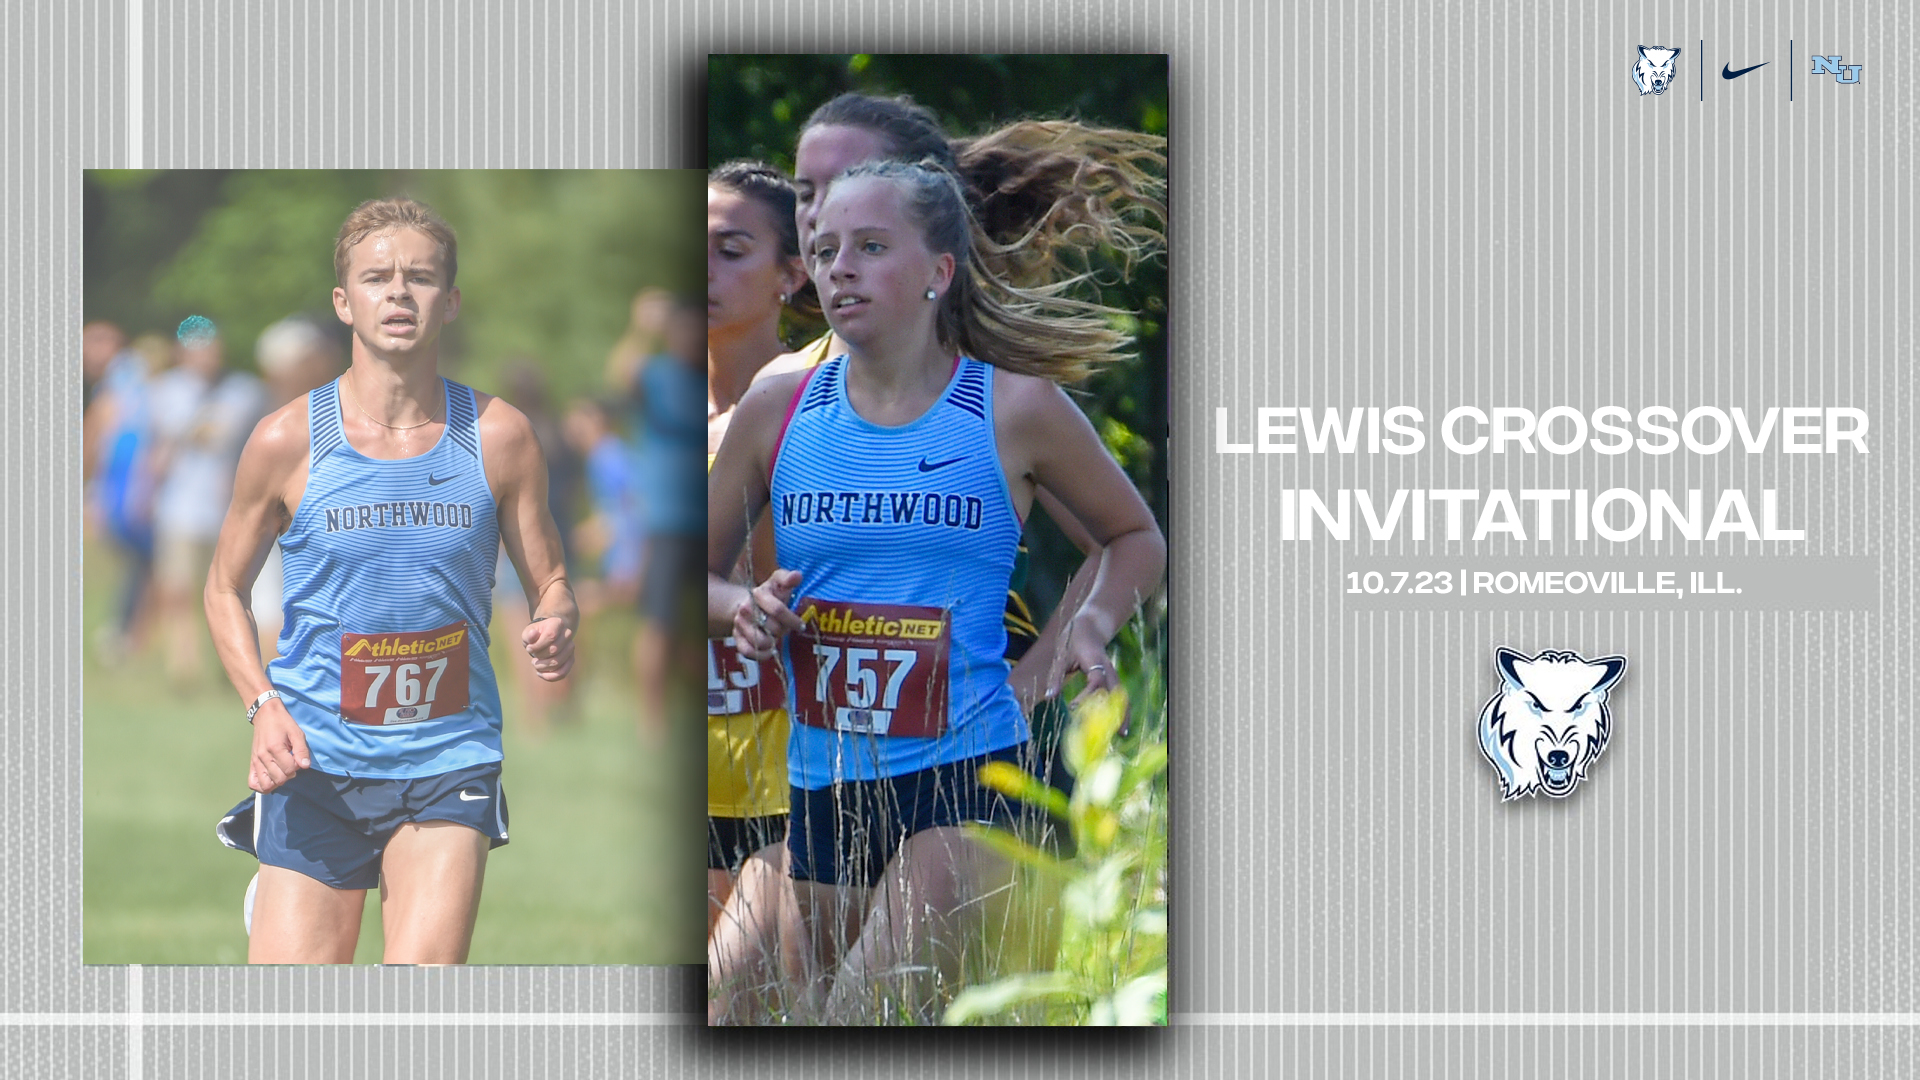 Cross Country Competes At Lewis Crossover